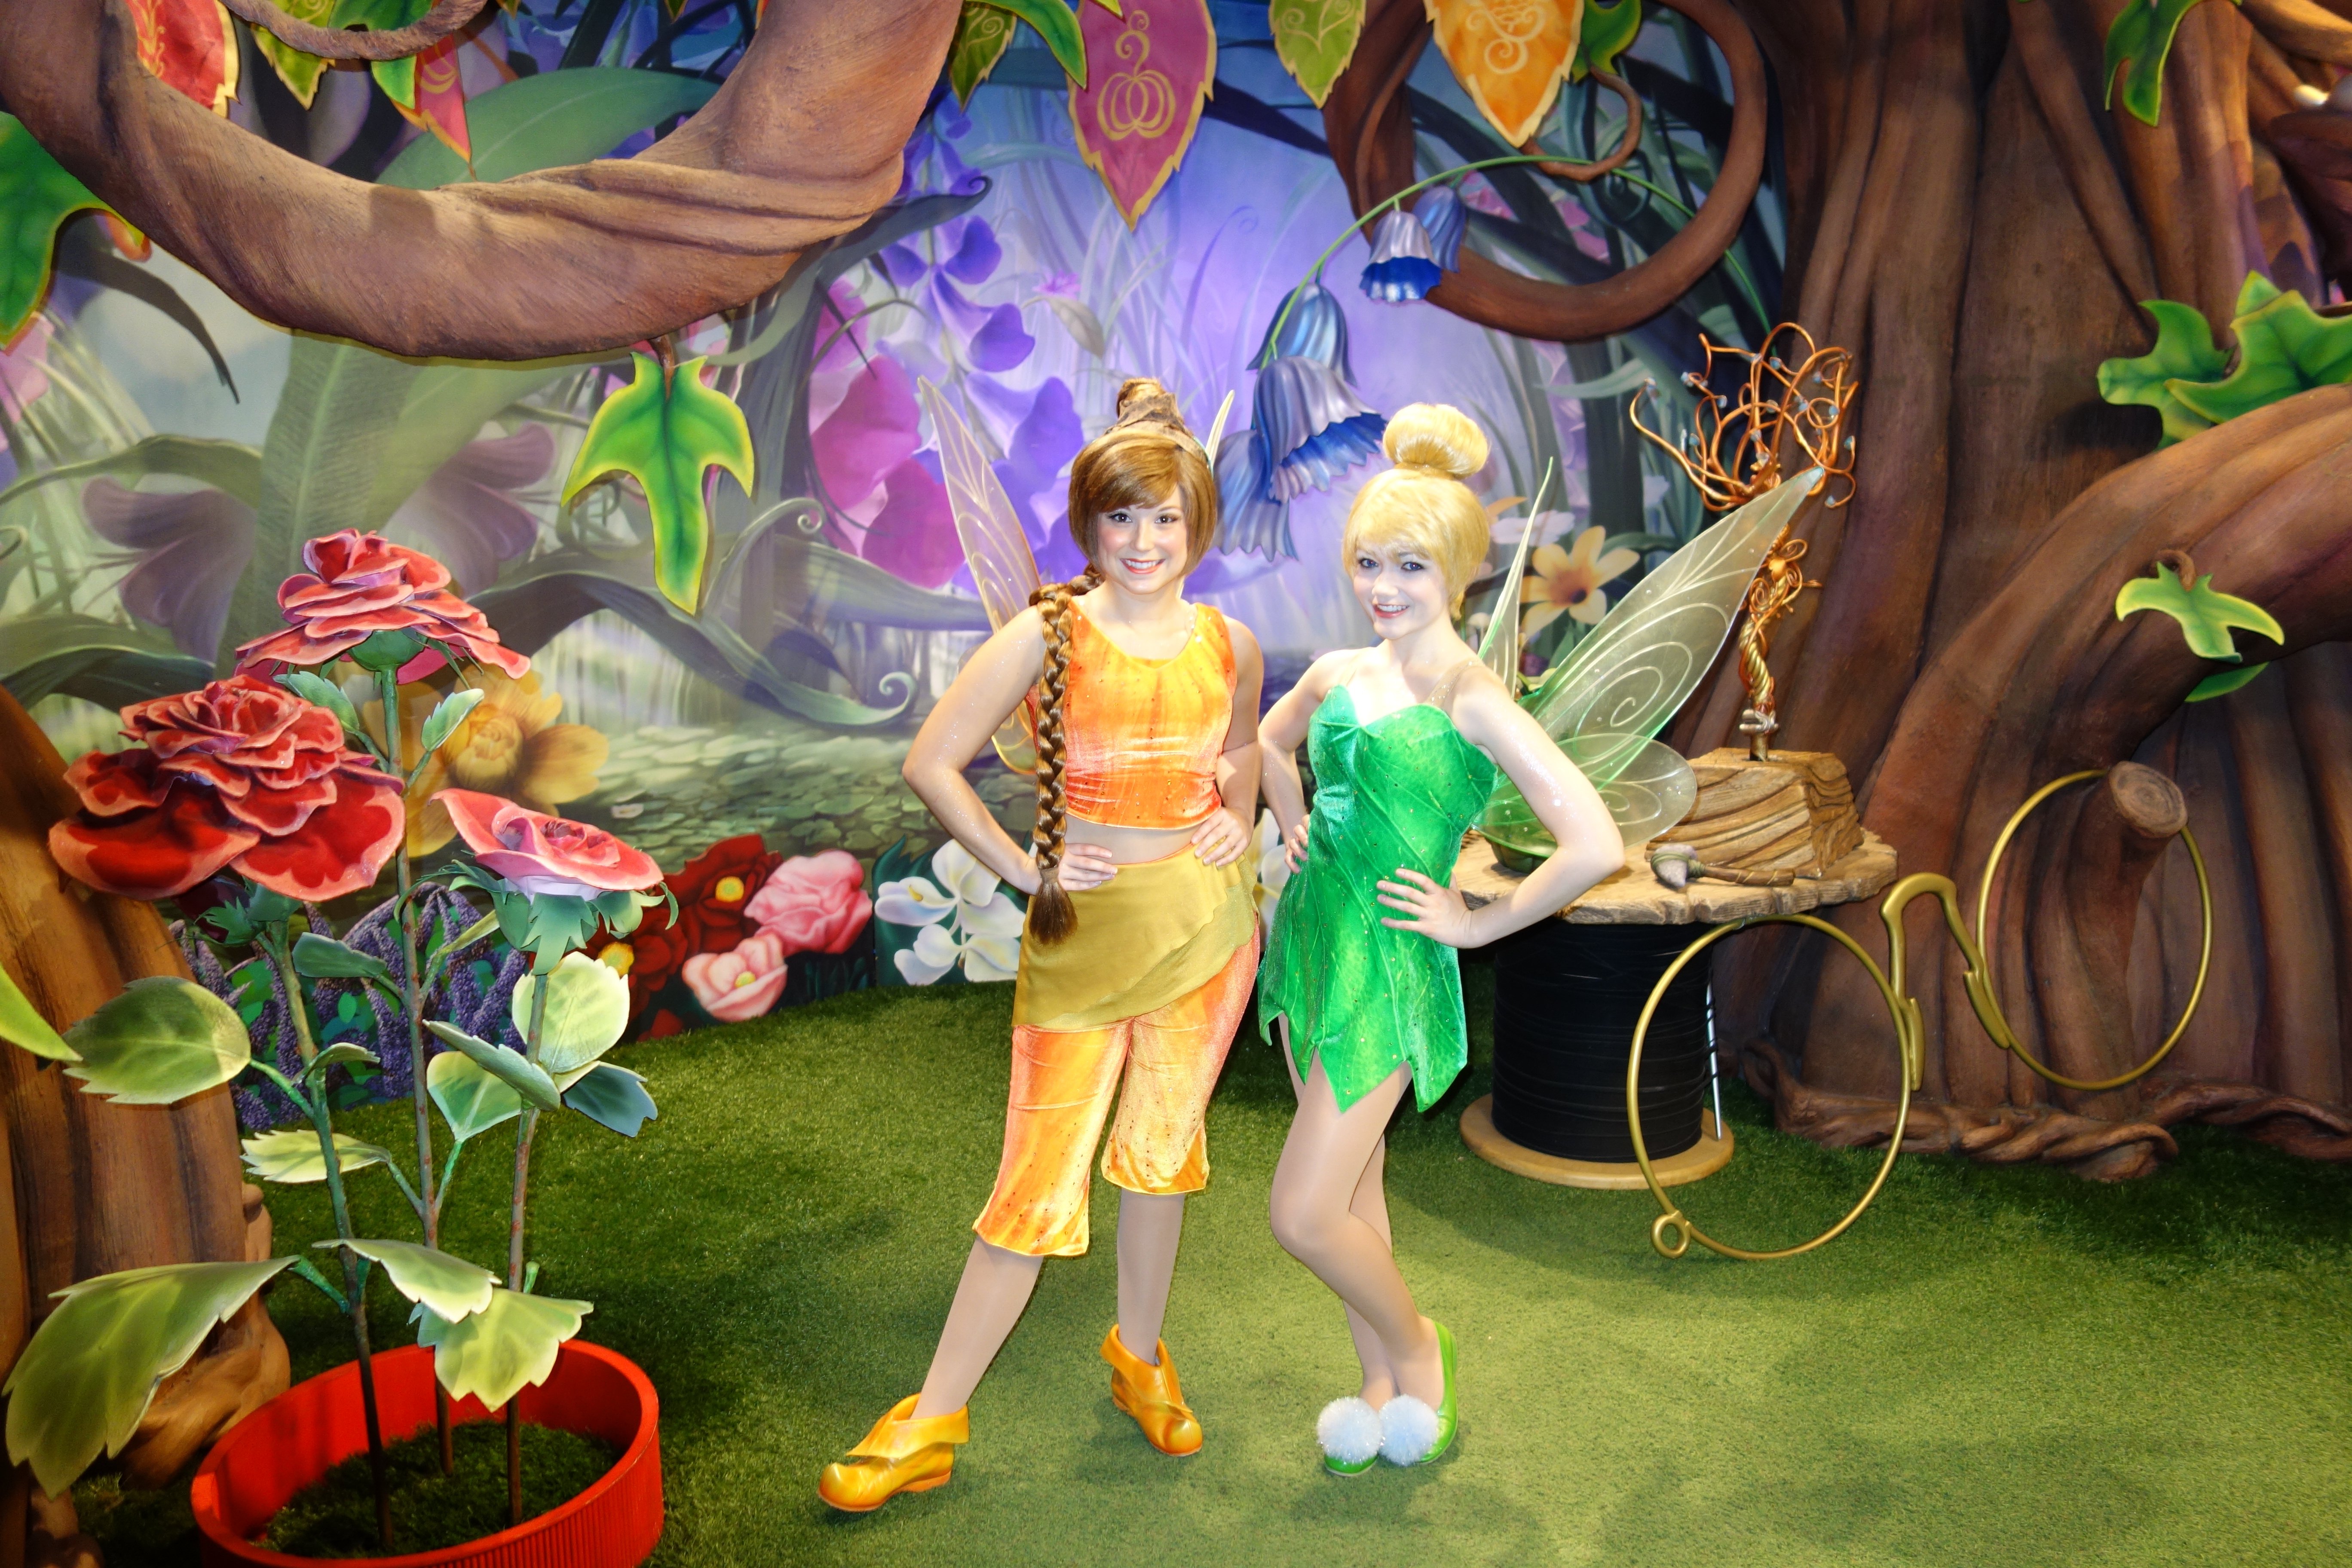 Tinker Bell met with Fawn on the left side of Tinker Bell's Nook.